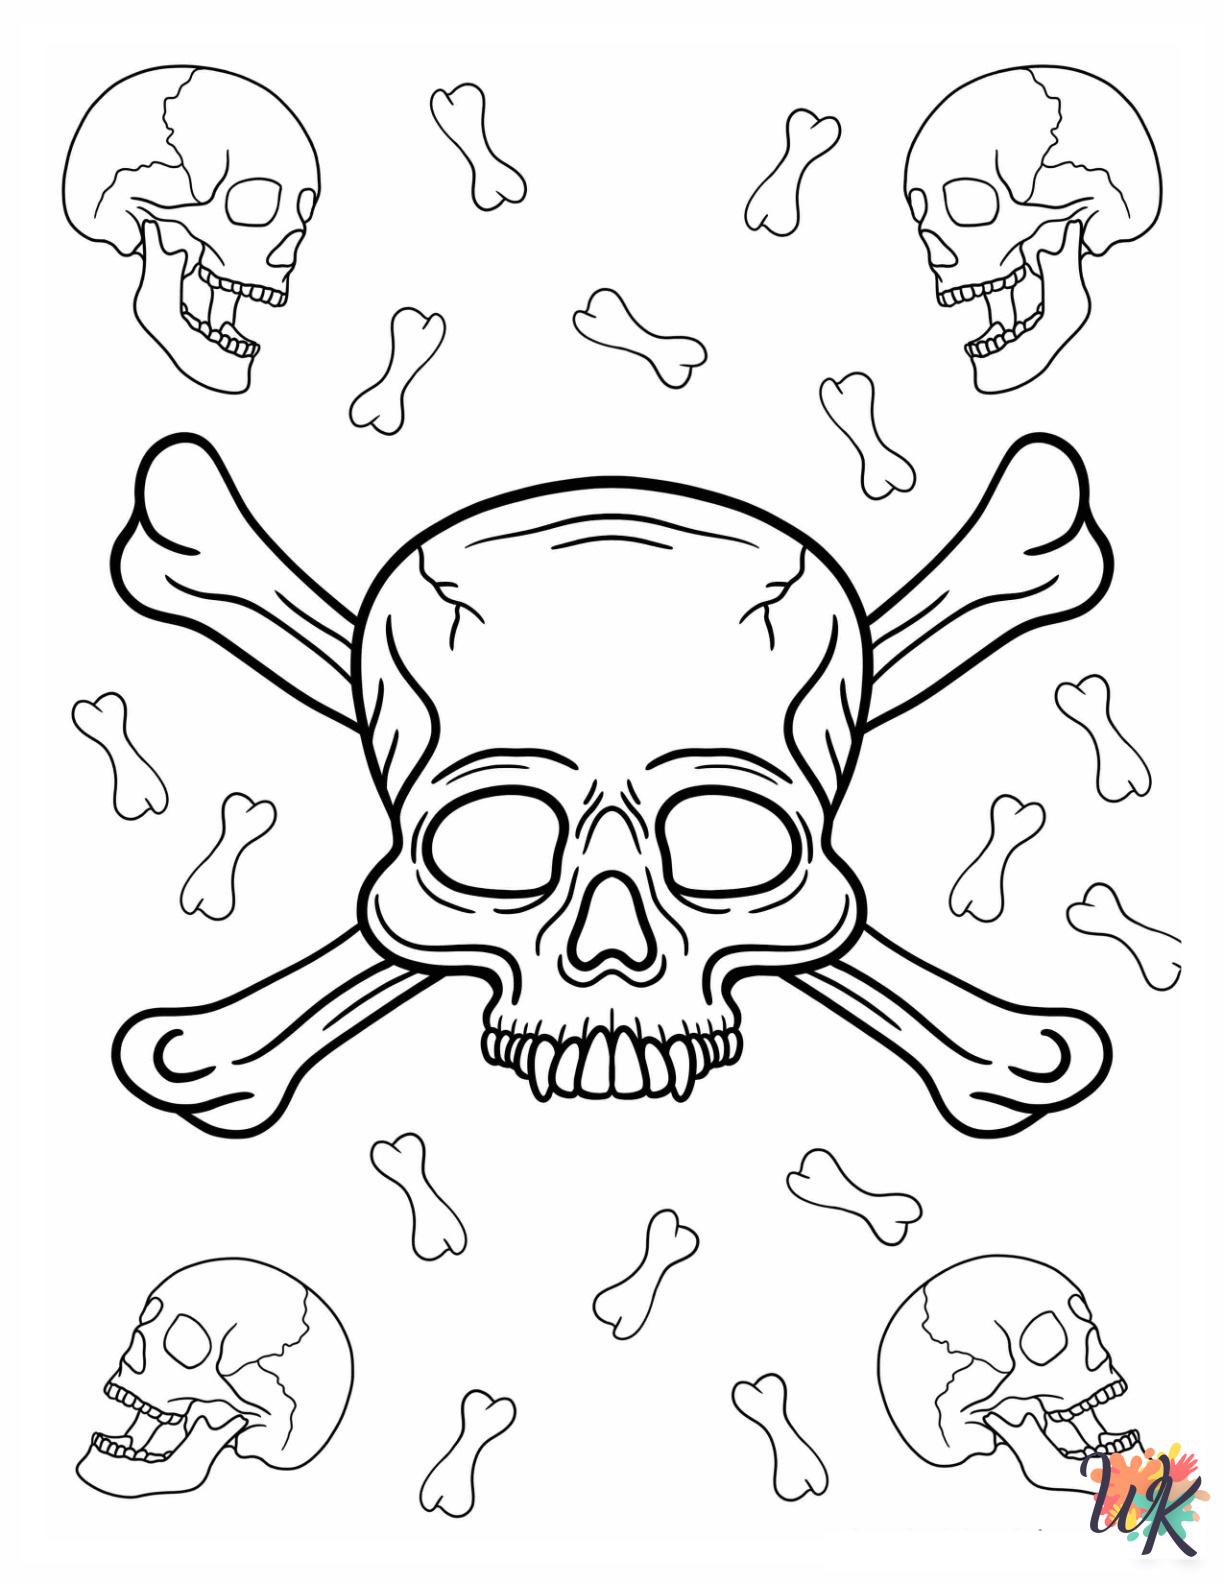 Skeleton coloring book pages